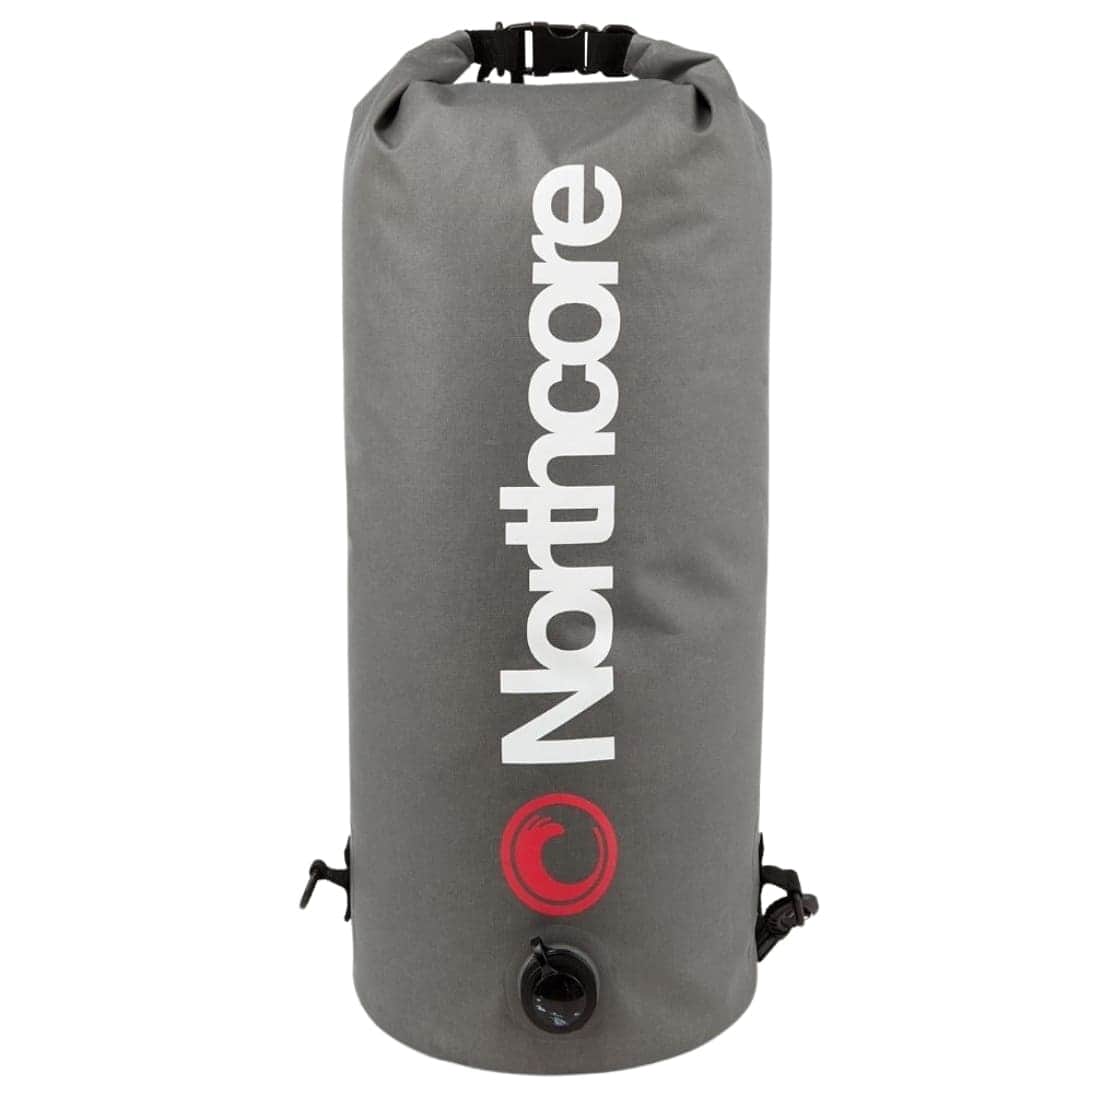 Northcore 20L Waterproof Compression Bag - Grey